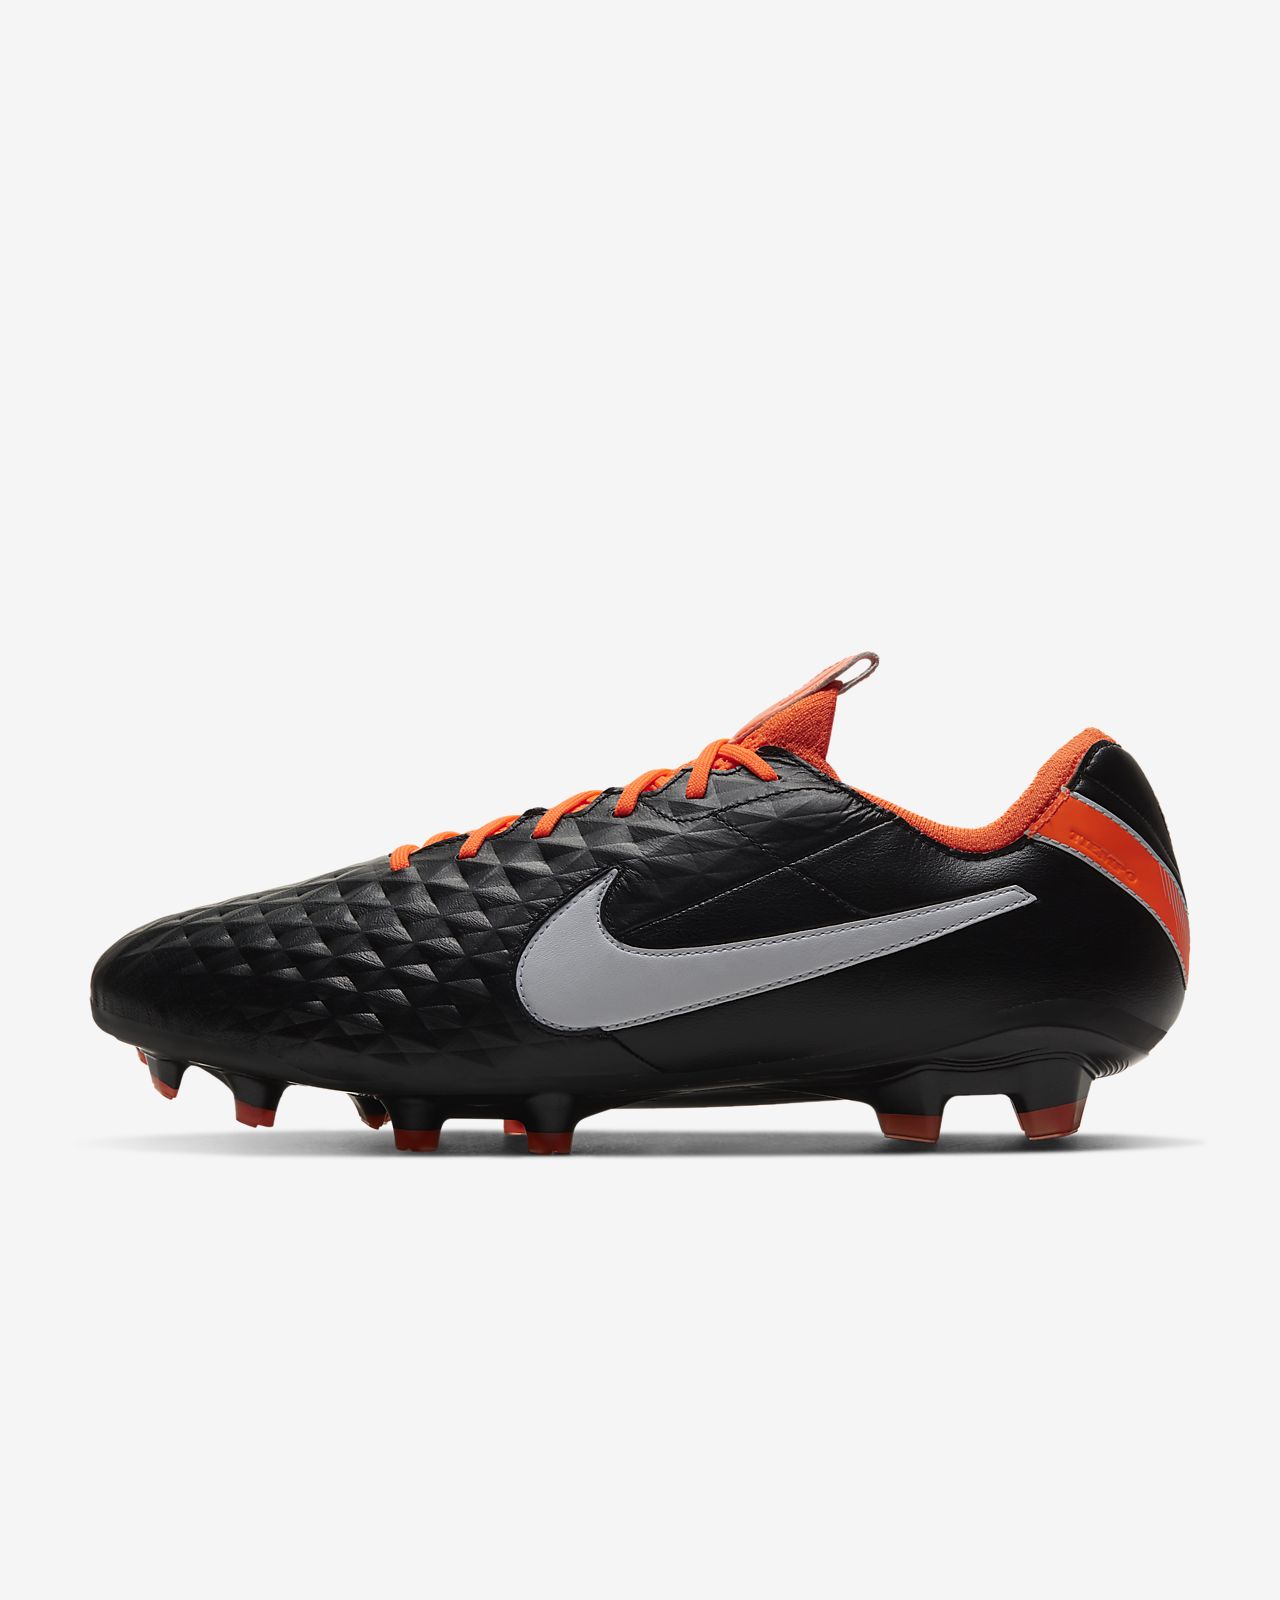 Nike Tiempo Legend 8 Elite FG football boot on a compact.